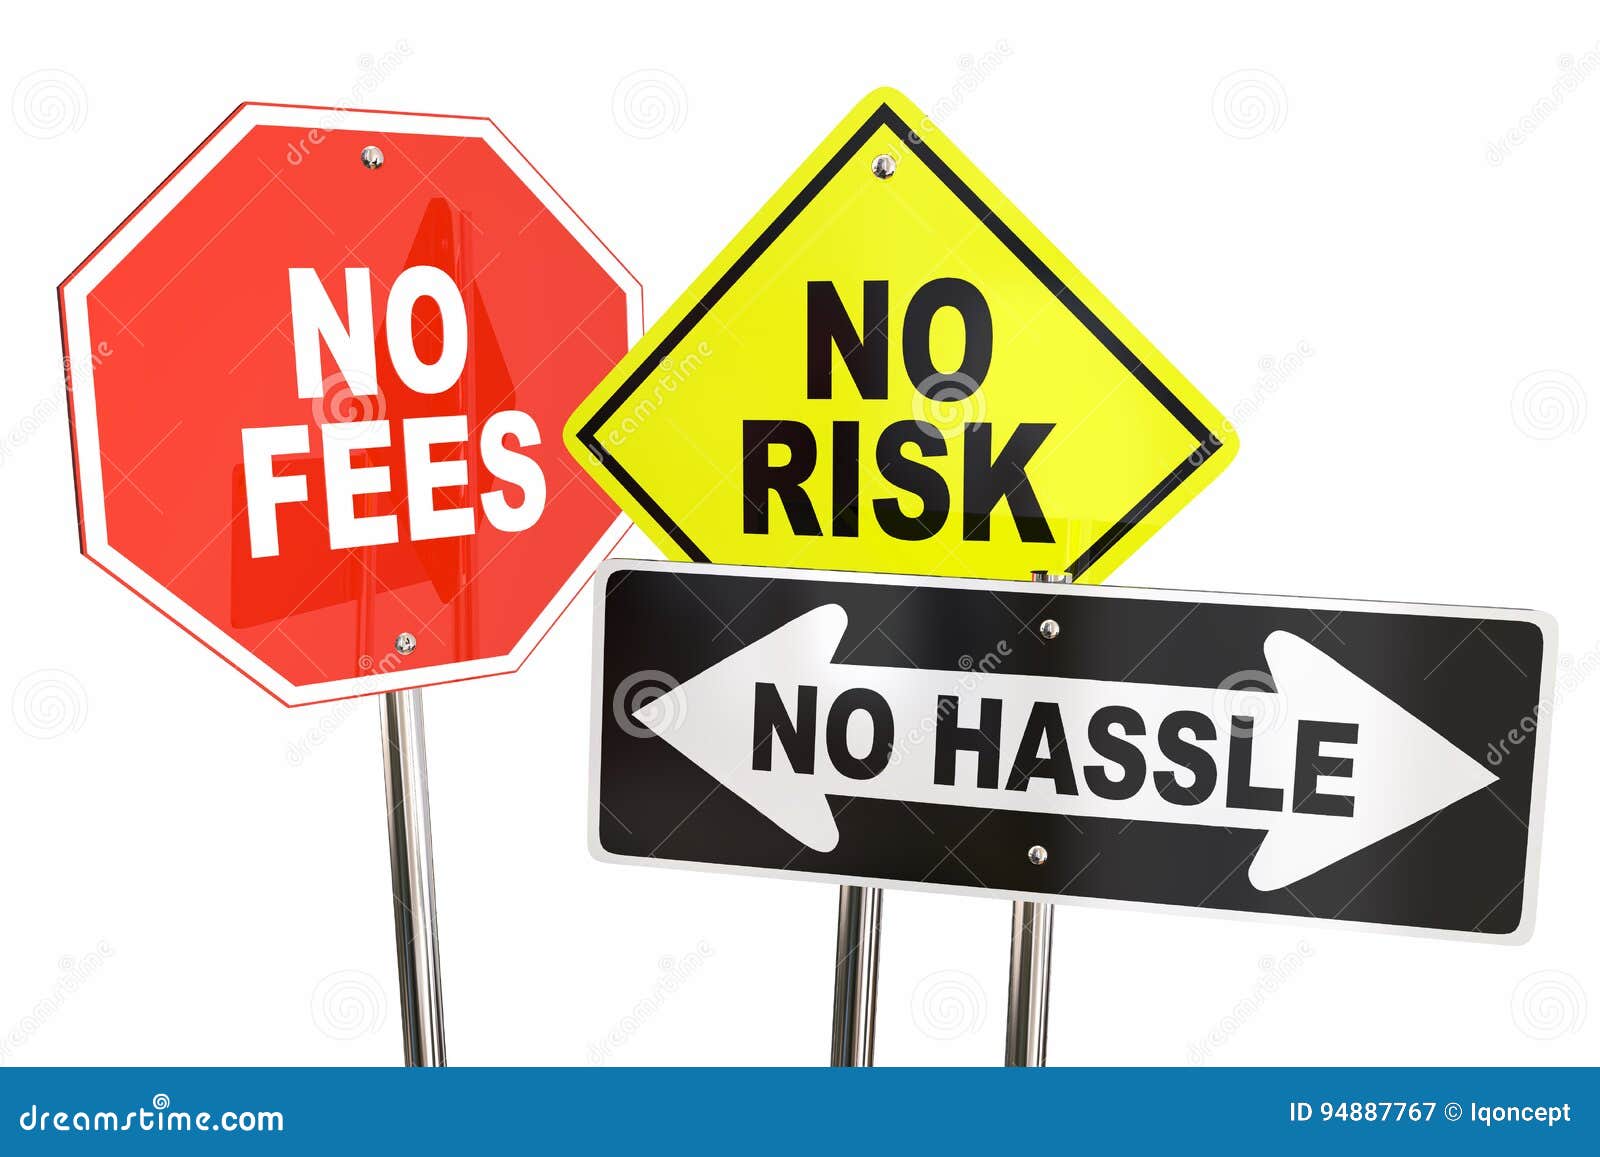 no risk fees hassle signs road street best choice 3d 